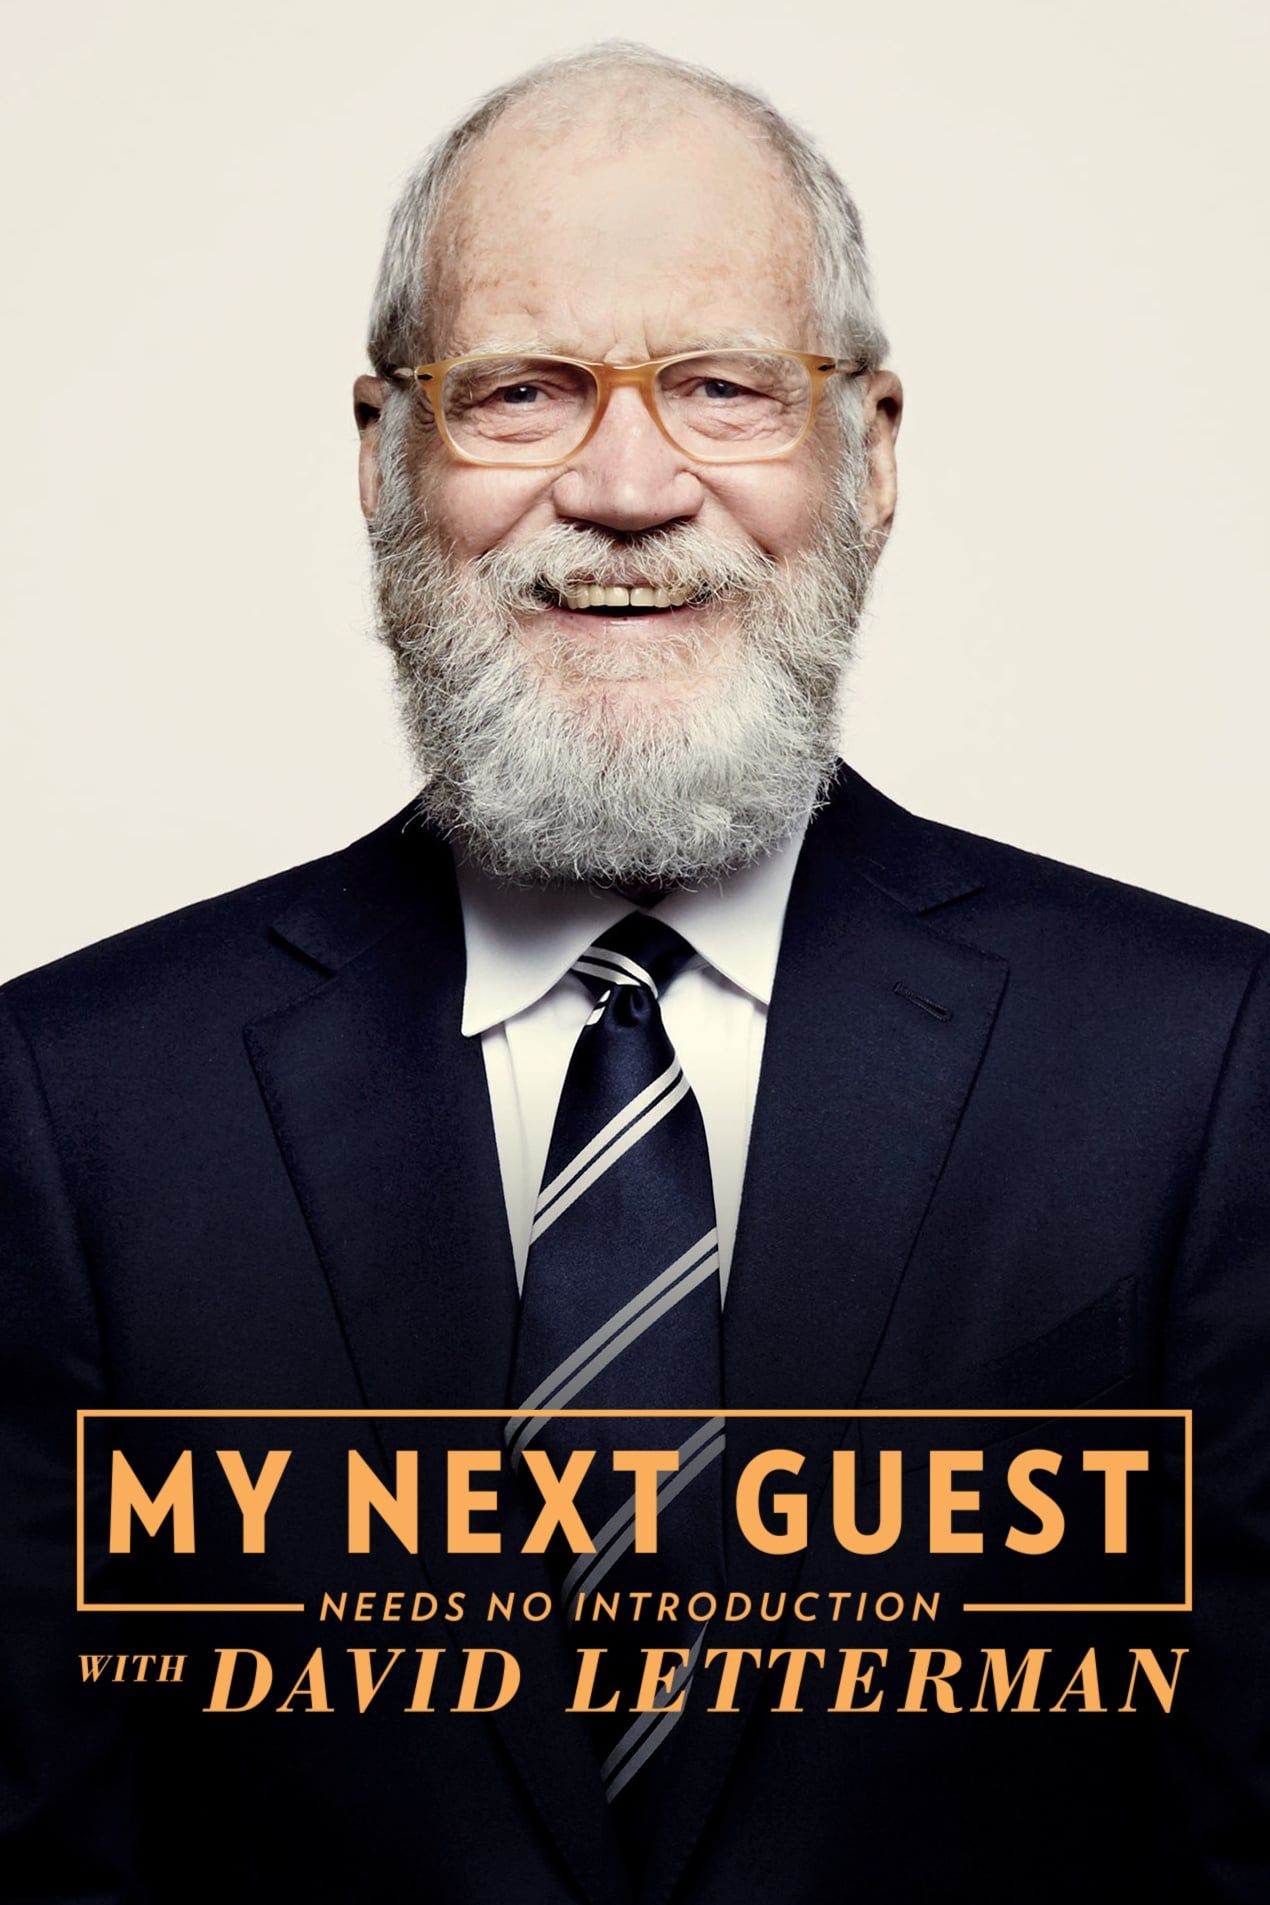 My Guest Needs No Introduction with David Letterman